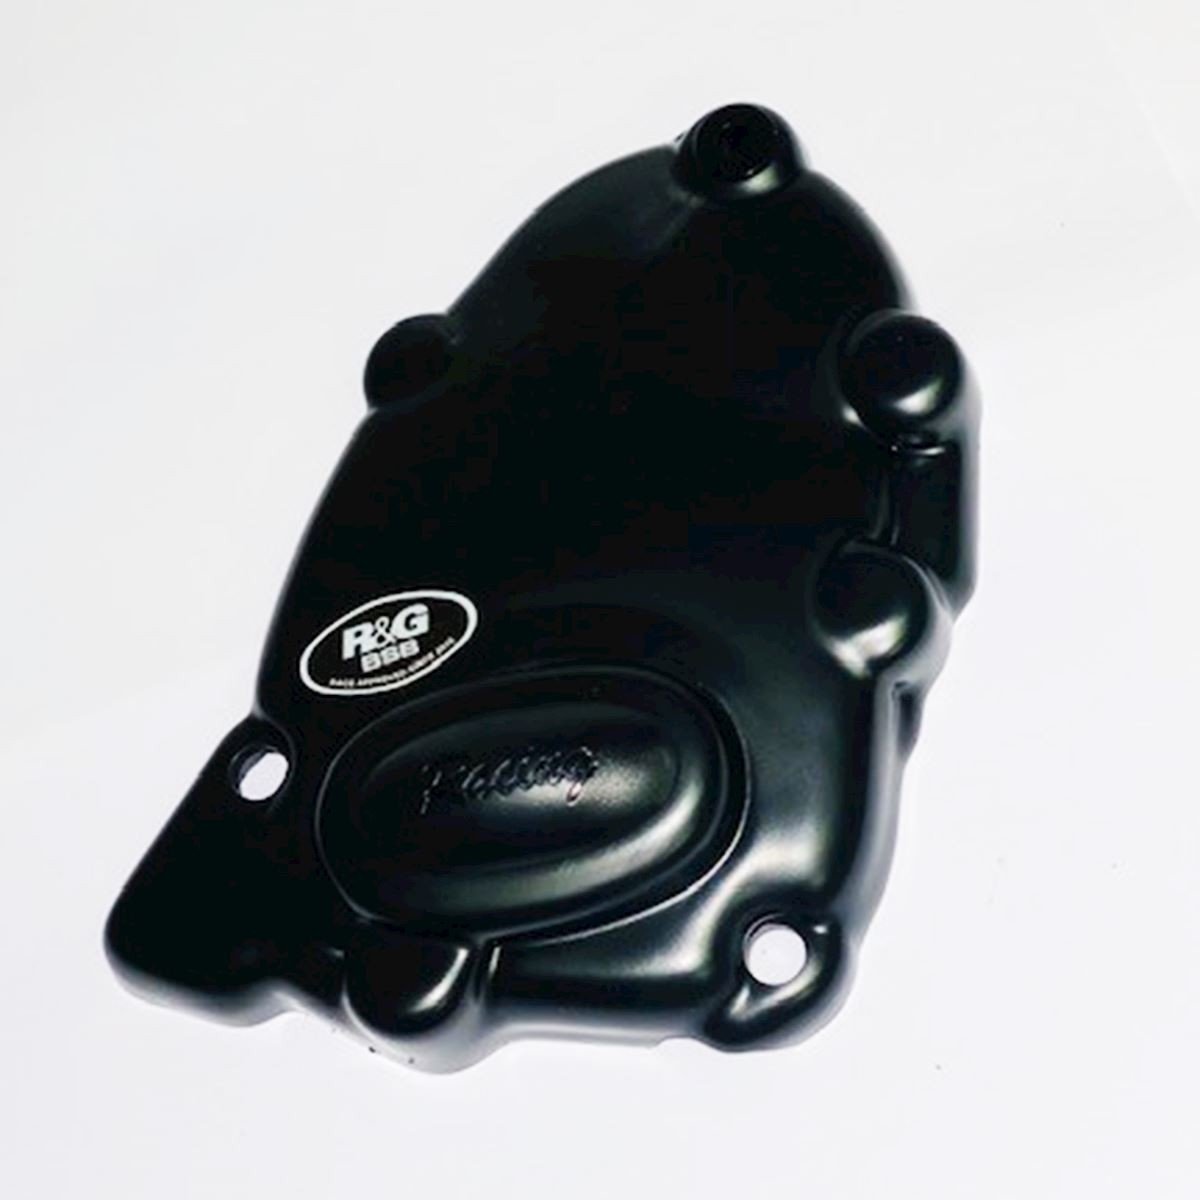 RG.ECC0354R Engine Case Cover for YAMAHA YZF-R6 '06-  Race version low profile - RHS